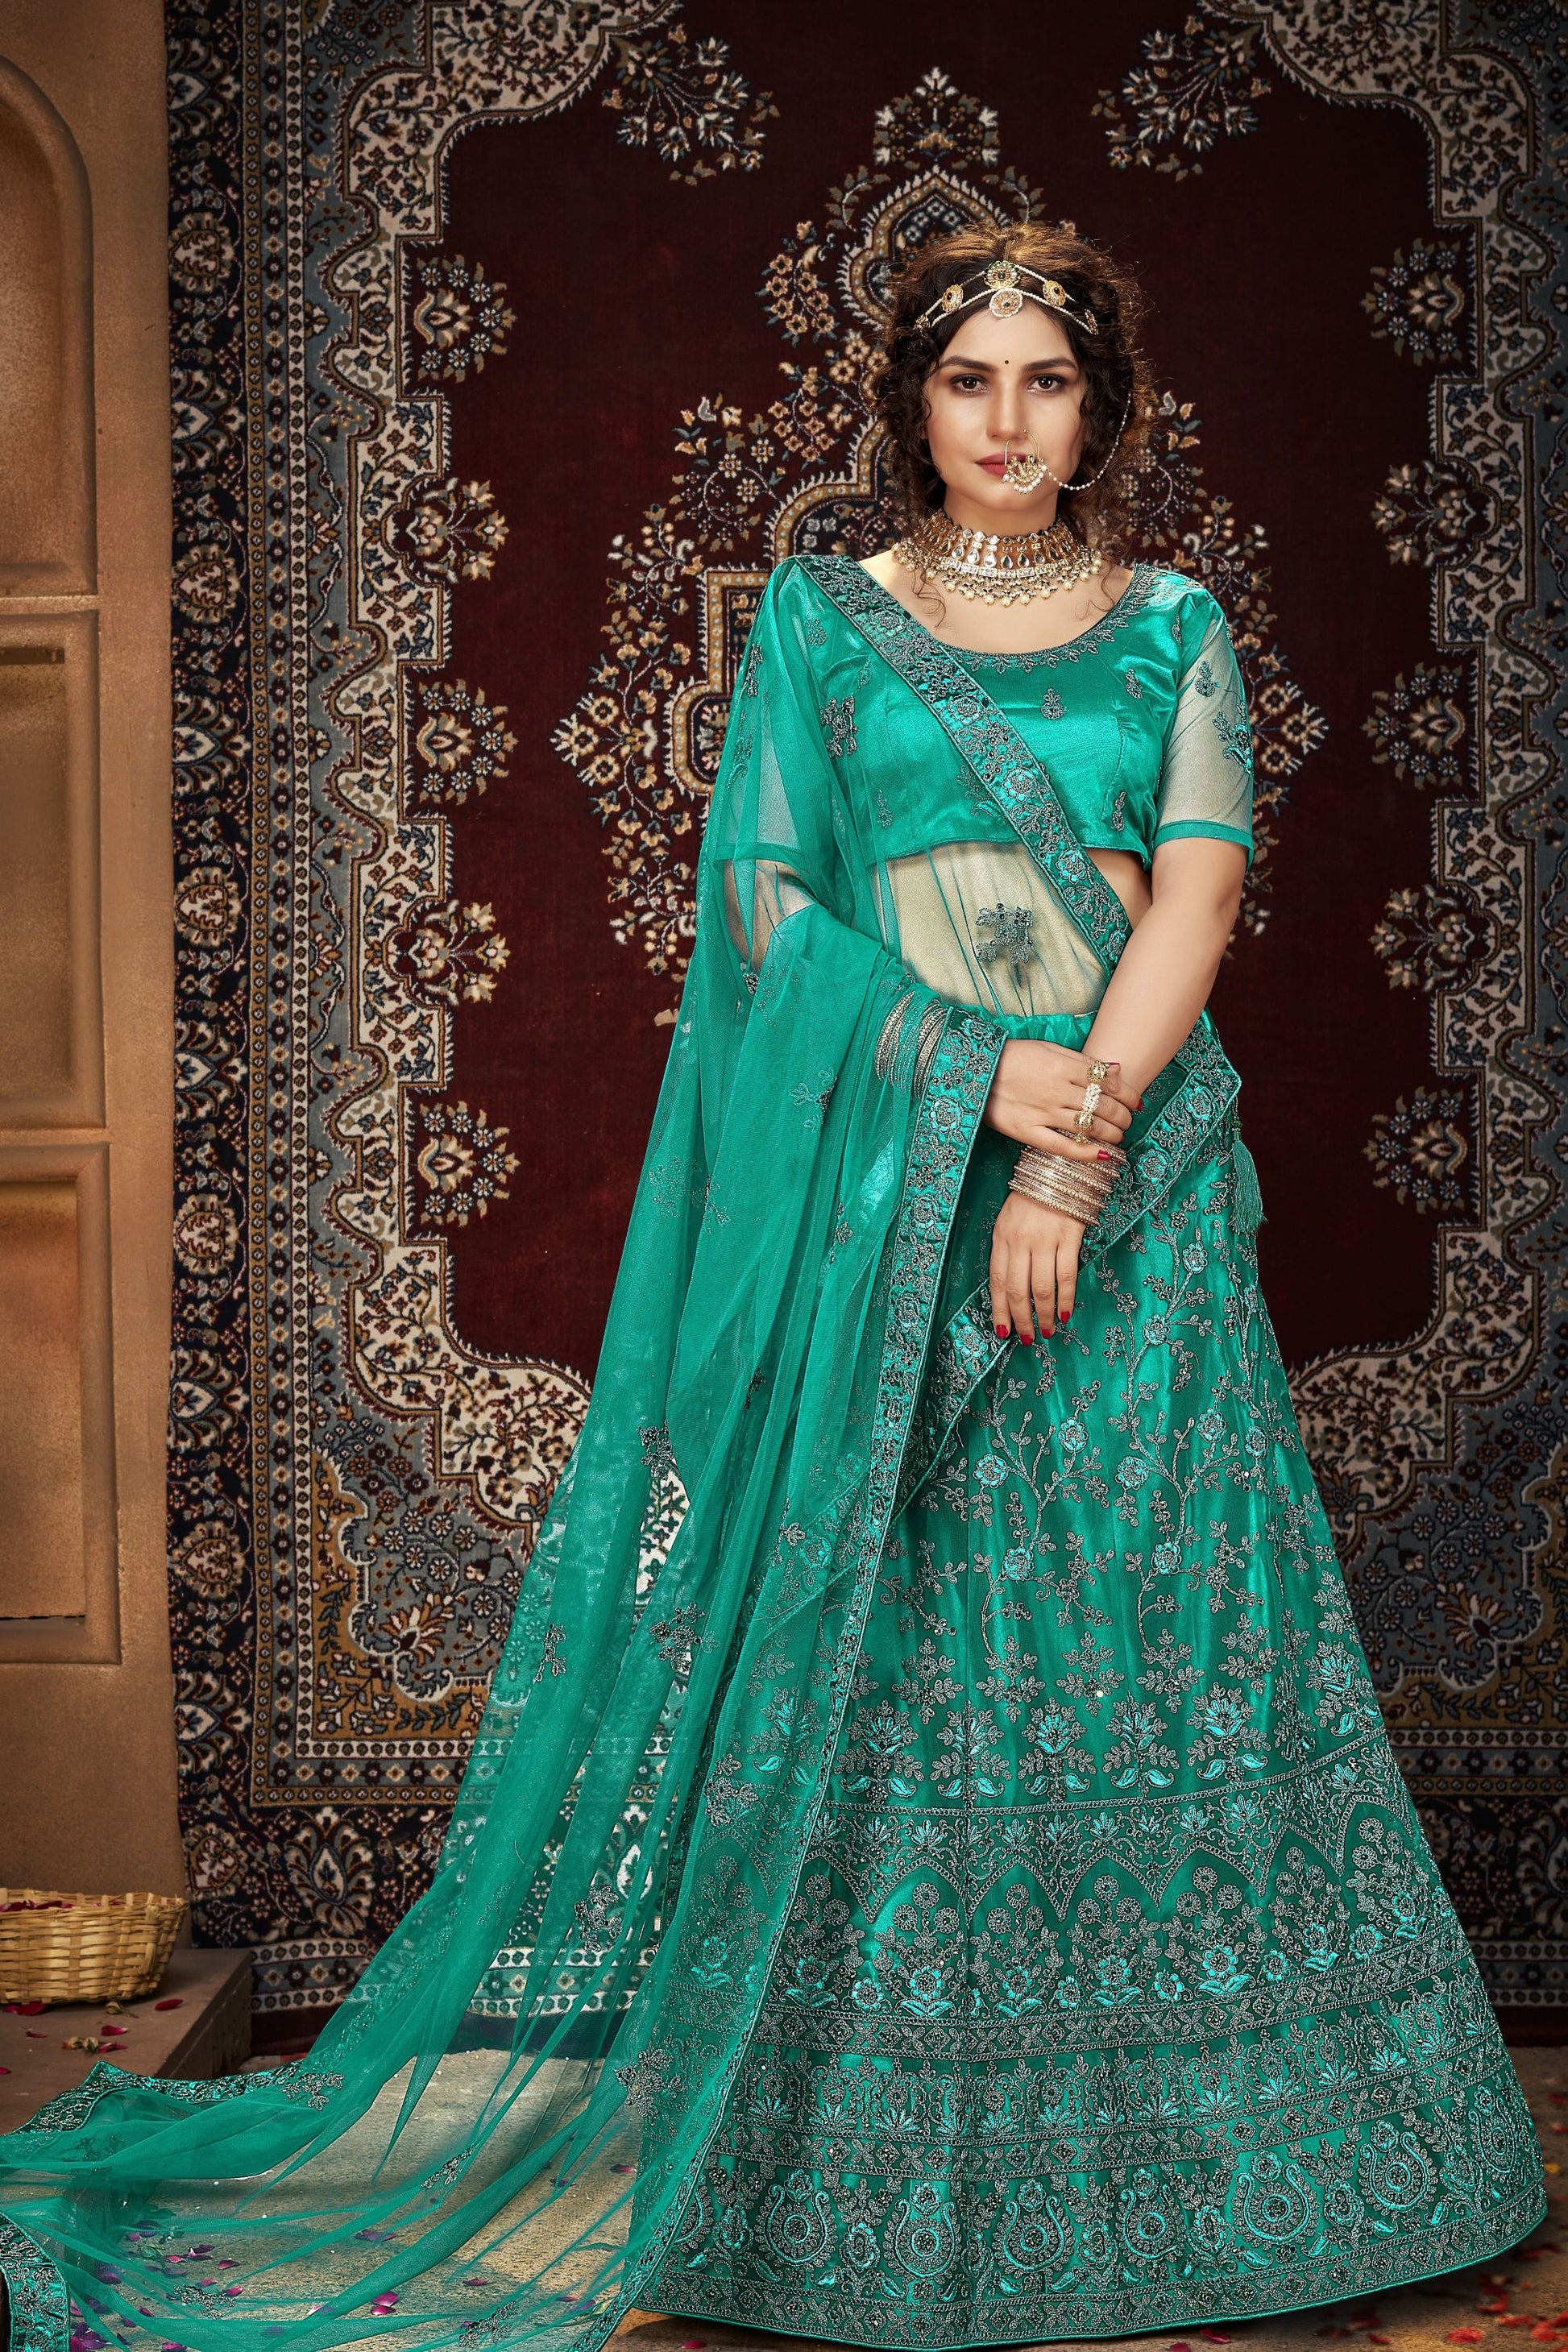 Teal Pakistani Net Lehenga Choli For Indian Festivals & Weddings - Sequence Embroidery Work, Thread Embroidery Work,